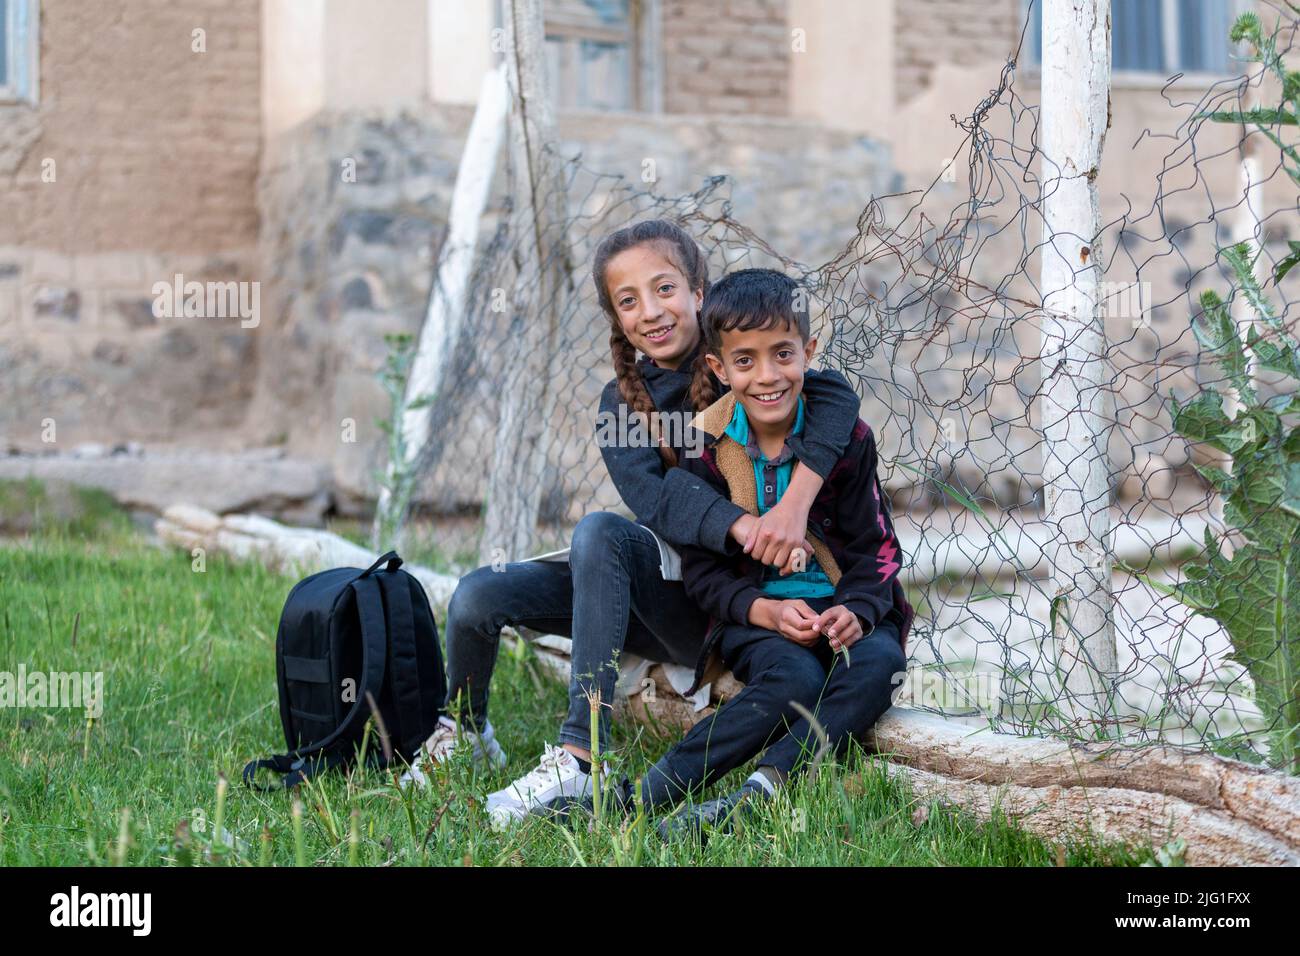 Two refugee brothers and sisters are sitting next to a child-braided fence. Stock Photo